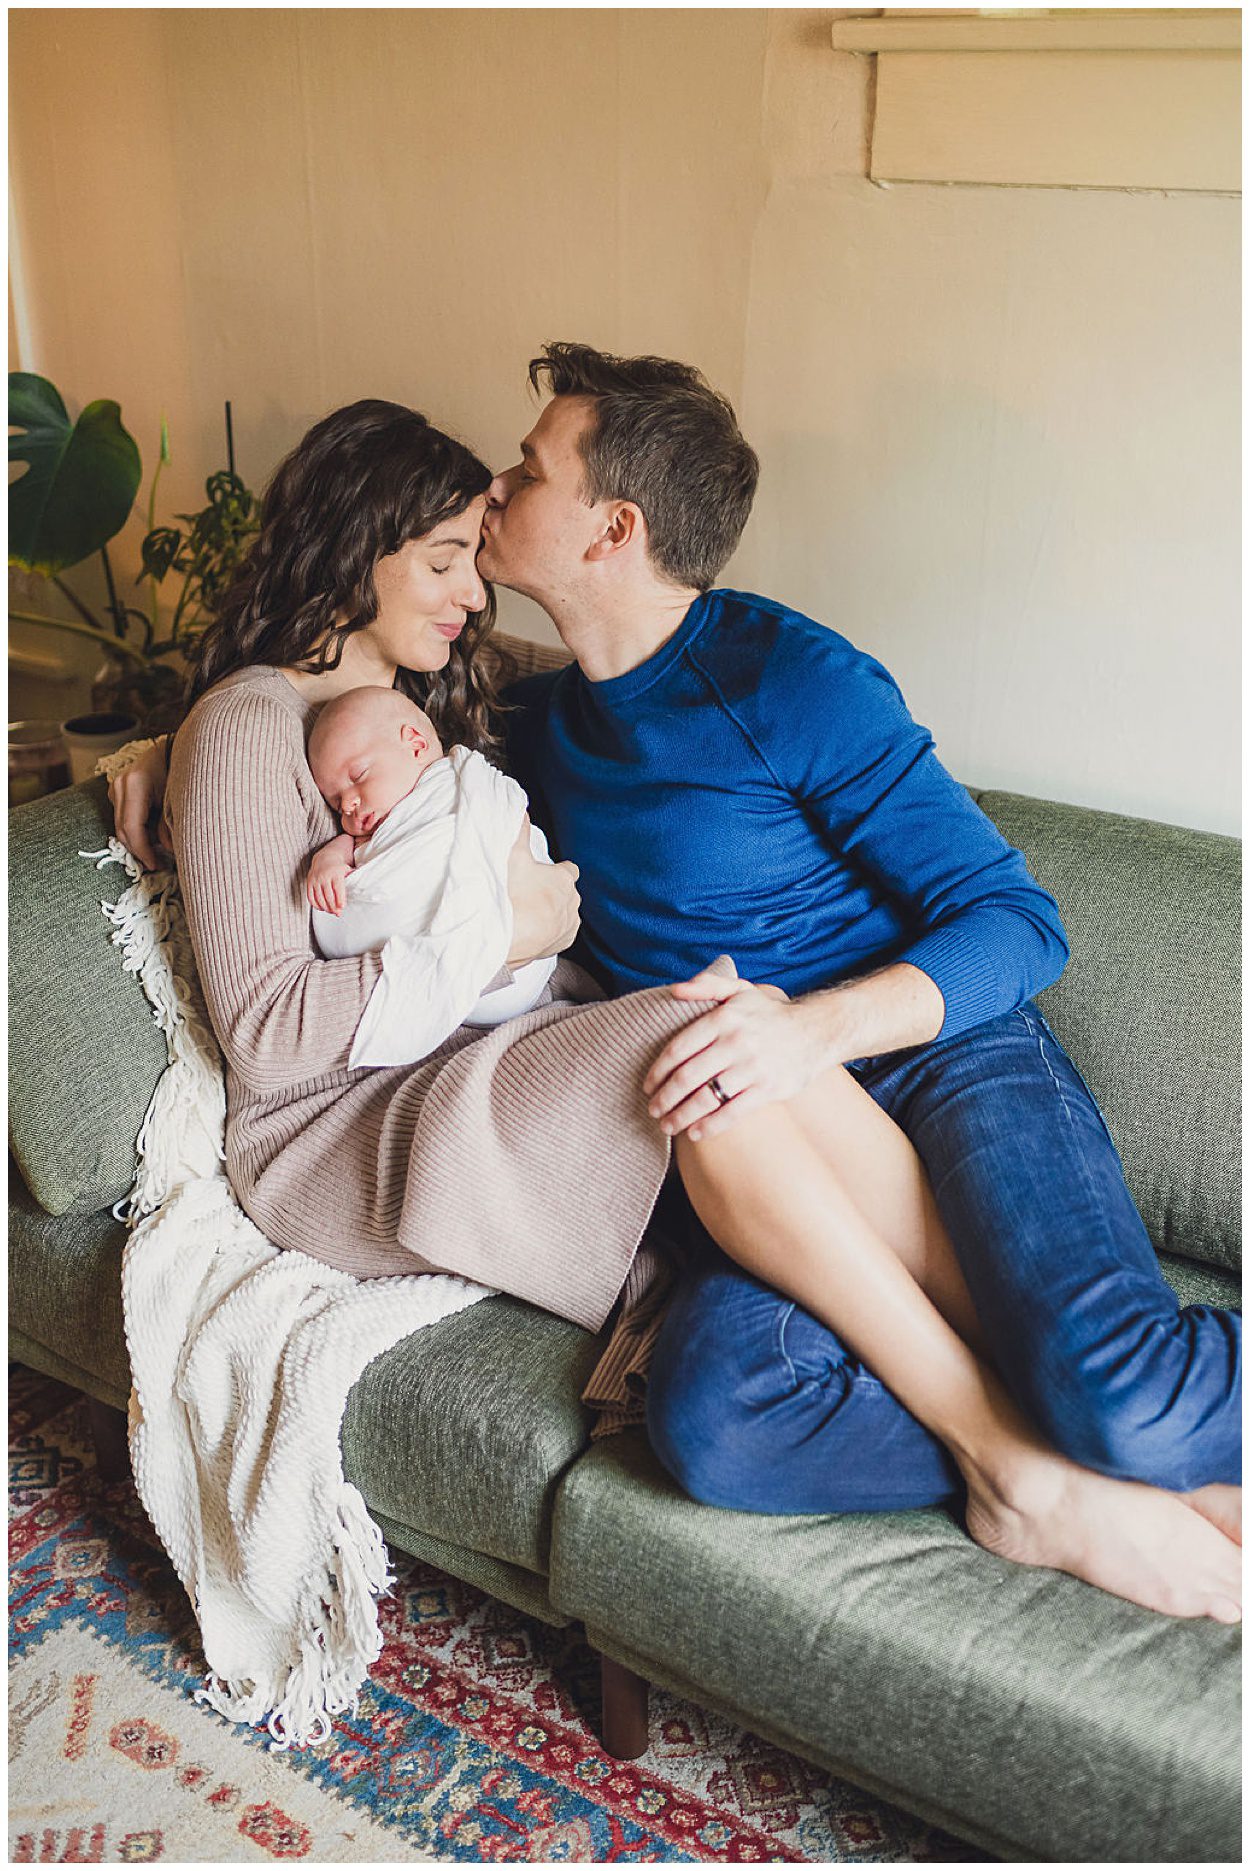 A mother and father cuddle on the couch while holding their newborn child in Portland Oregon. The father is kissing the mother on the forehead and the baby is sleeping in the mother's arms